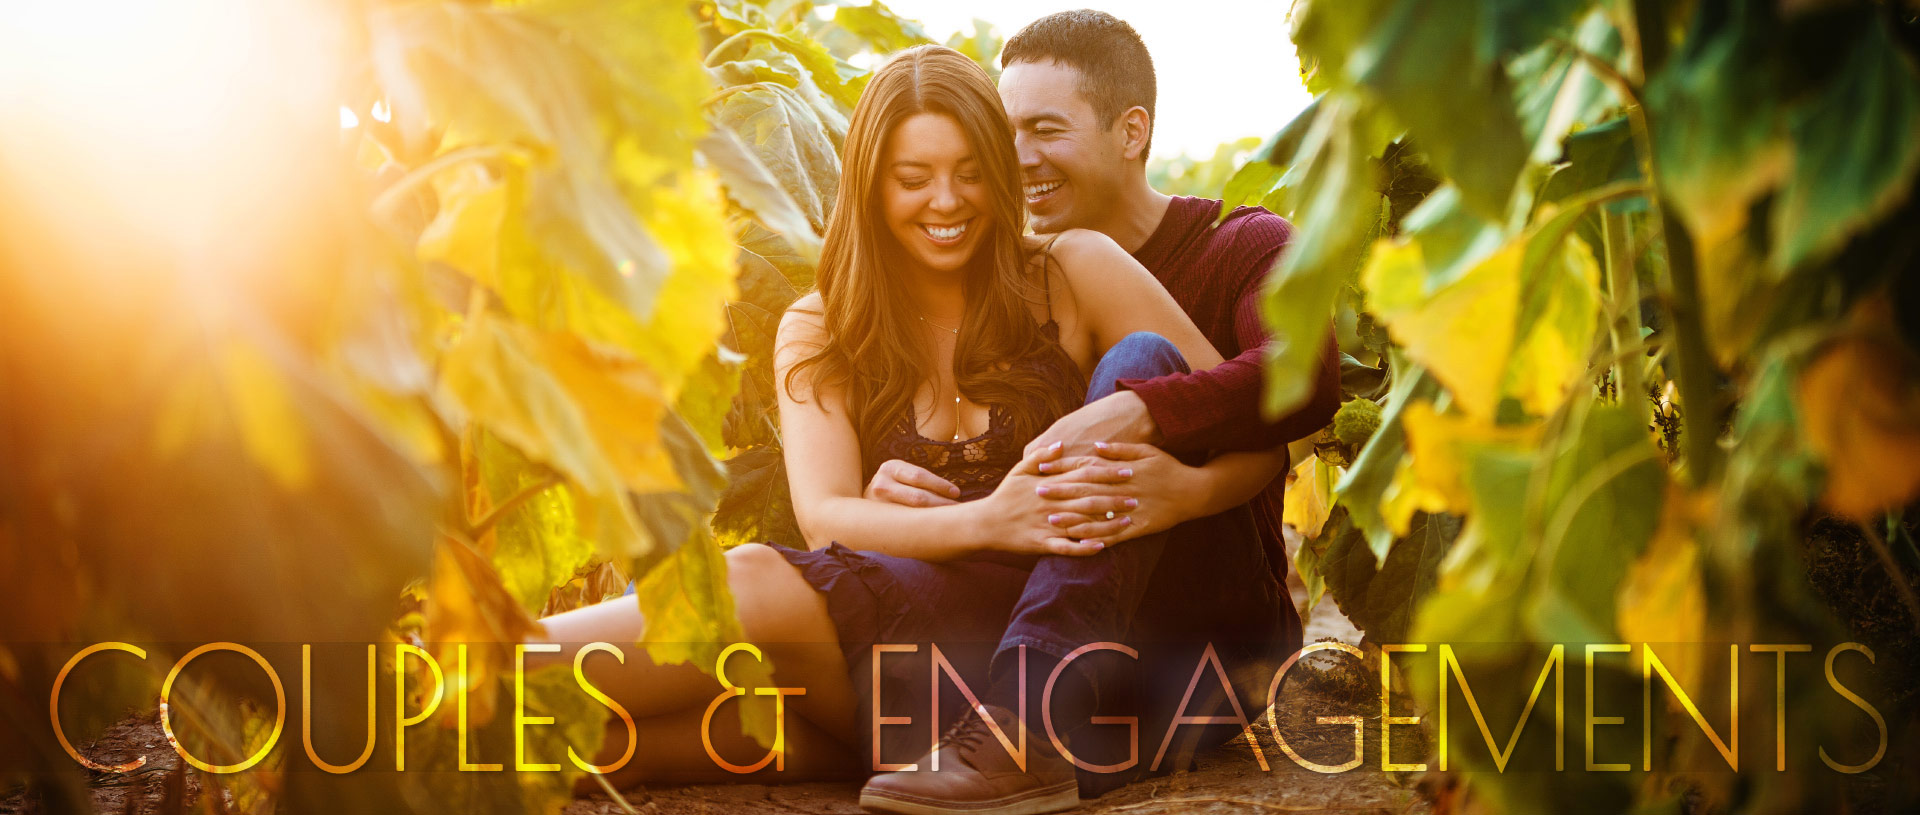 Boise Idaho couples & engagement photography celebrating love of all ages and genders